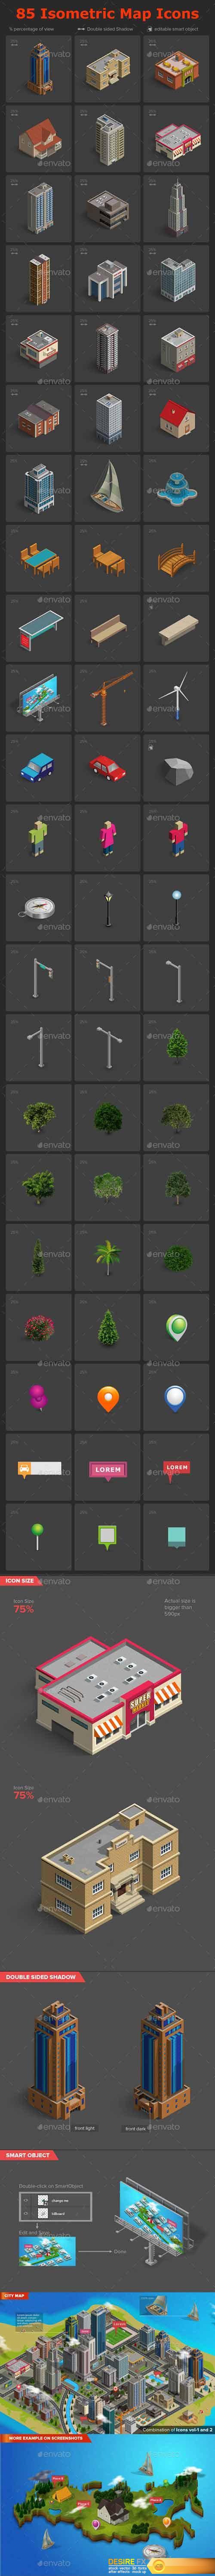 Graphicriver - Isometric Map Icons Vol.02 17979944